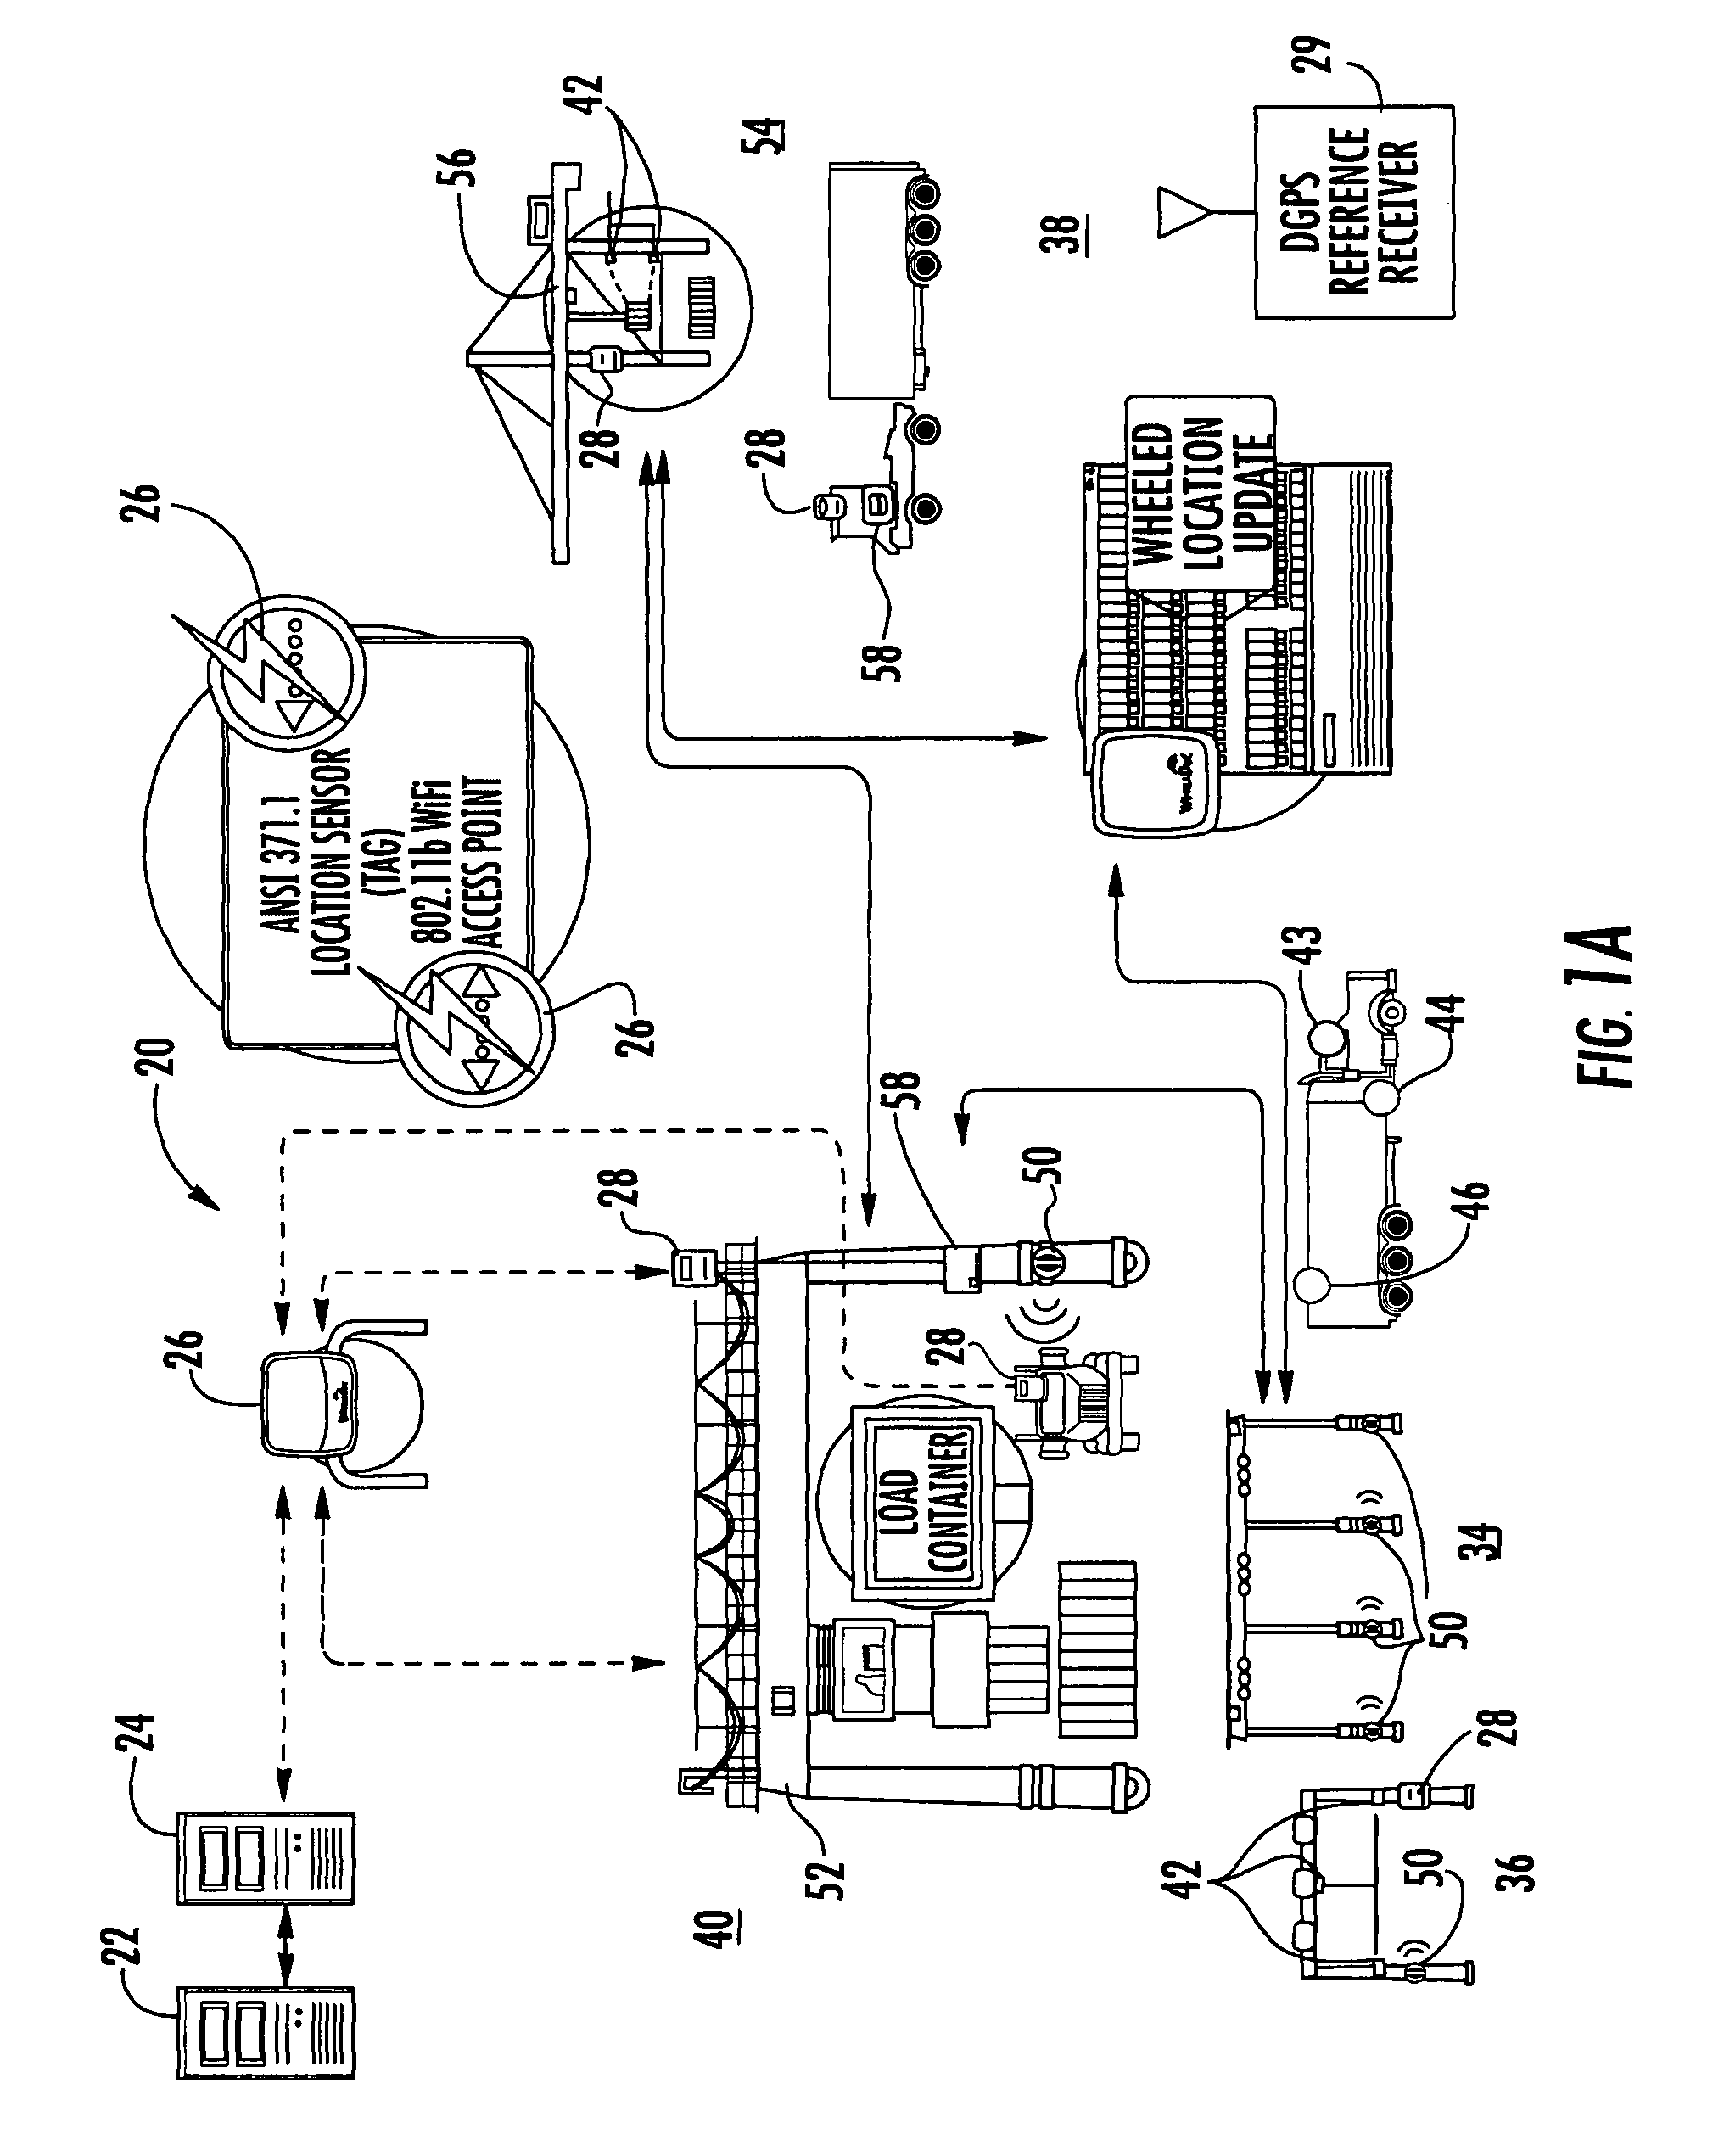 System and method for tracking vehicles and containers